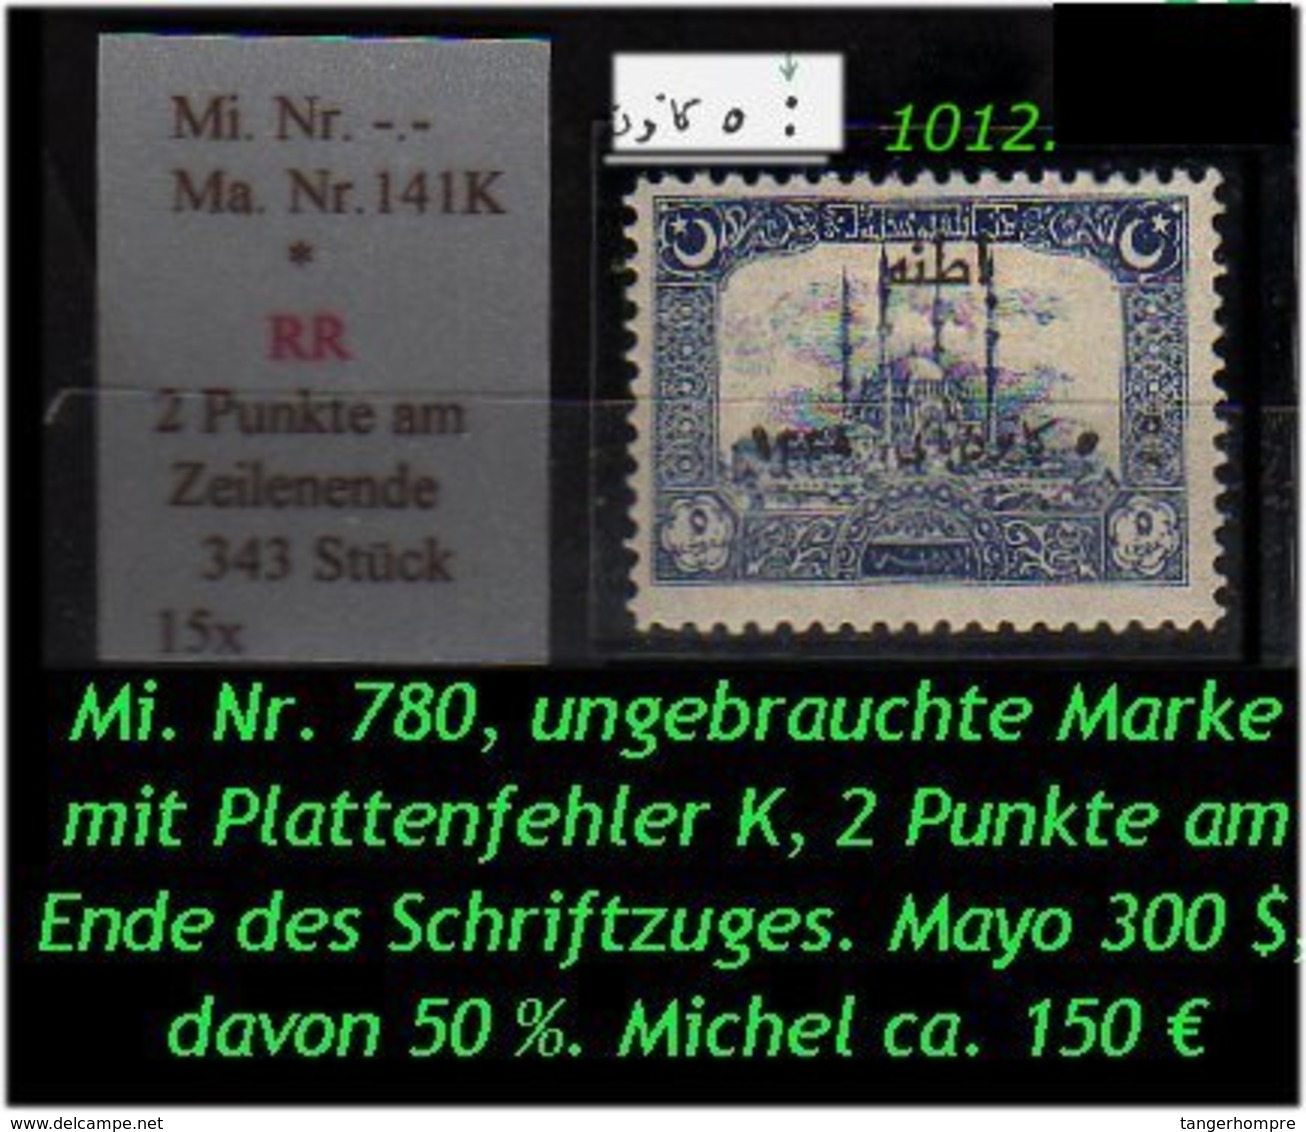 EARLY OTTOMAN SPECIALIZED FOR SPECIALIST, SEE...Mi. Nr. 780 Mit Plattenfehler - Mayo 141 K - Ungebraucht